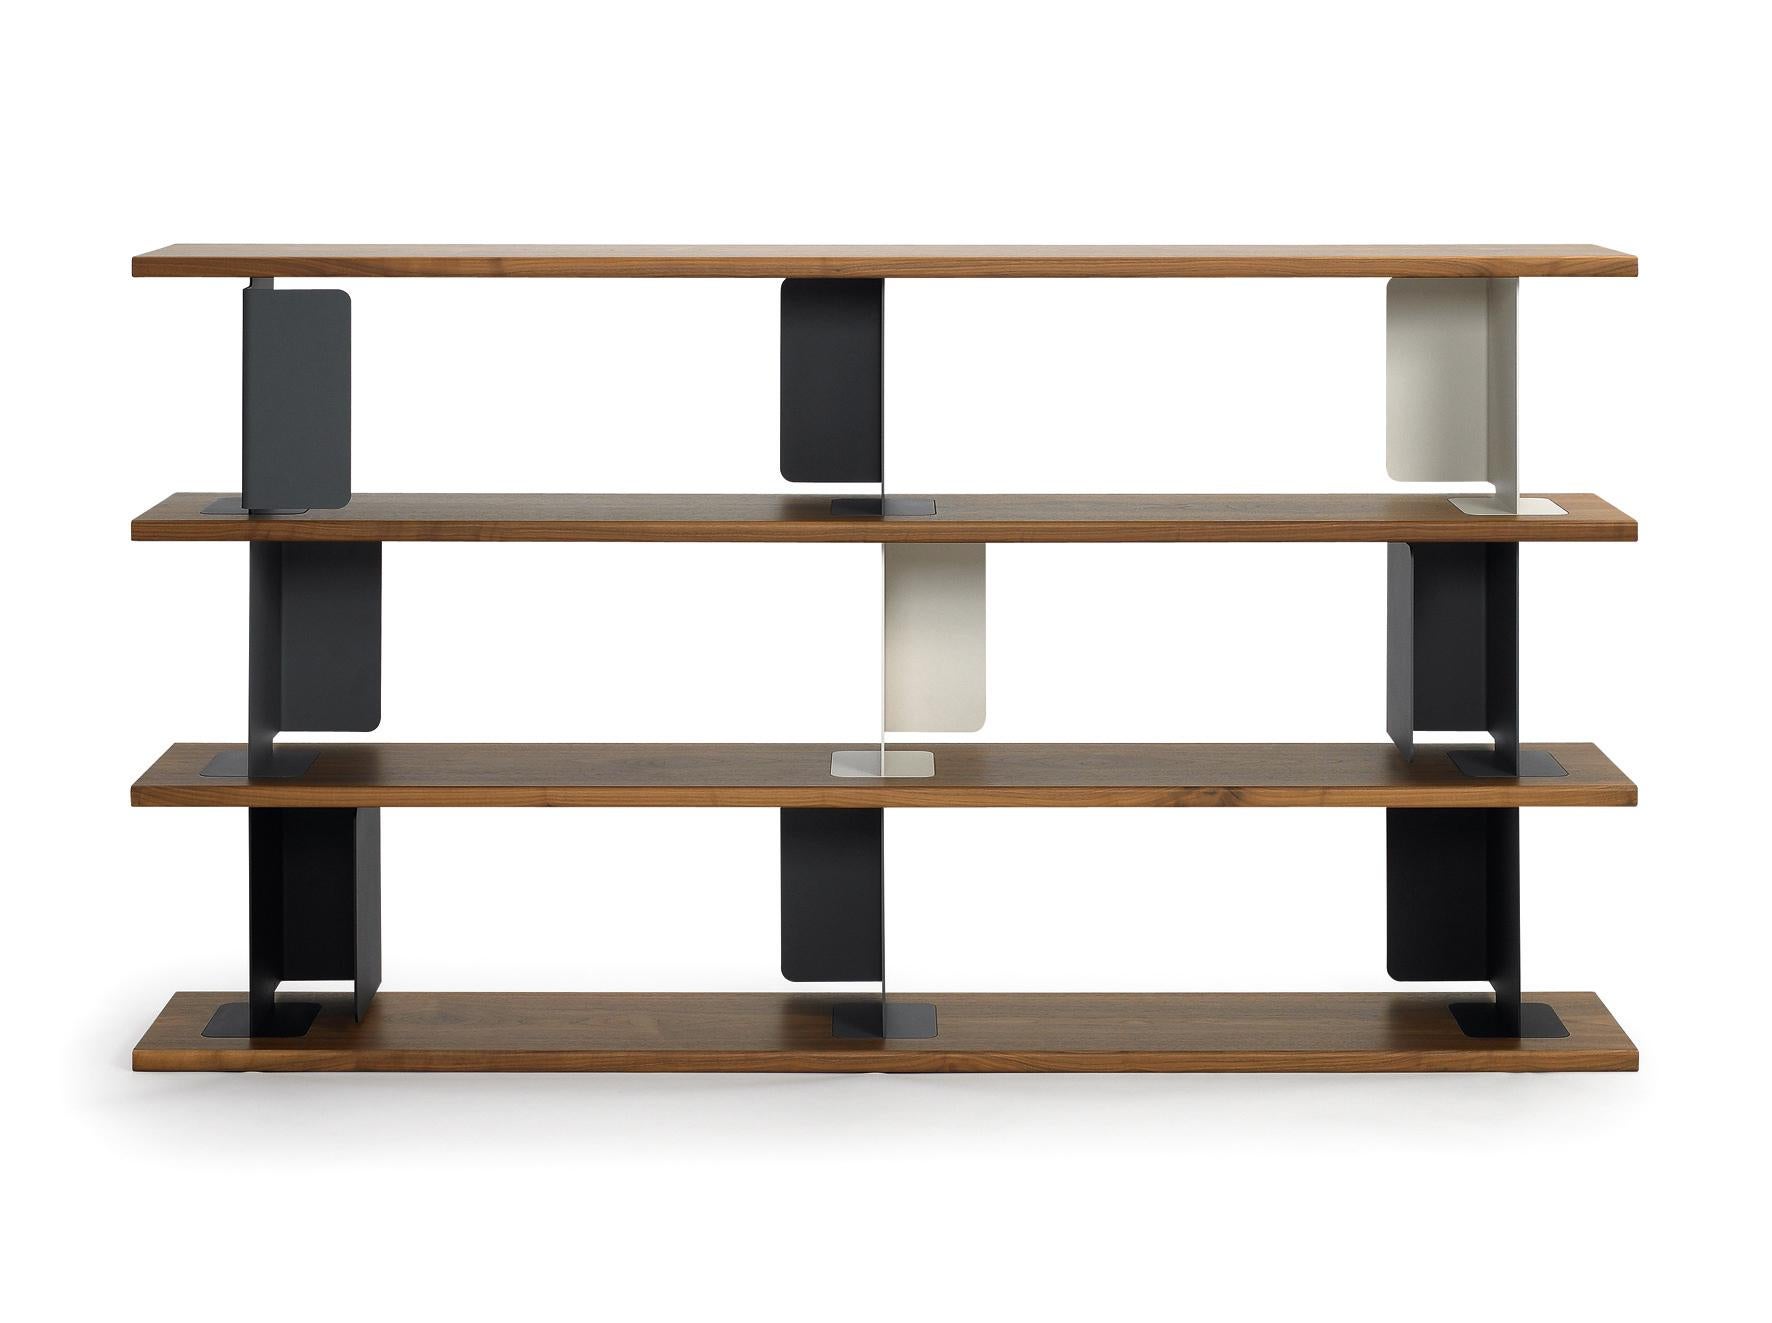 Furnishing is a creative game of possibilities. The shelving unit Paris by the London design team of Edward Barber and Jay Osgerby offers plenty of scope to indulge the urge to play. As the shelves are connected by clip elements which are neither